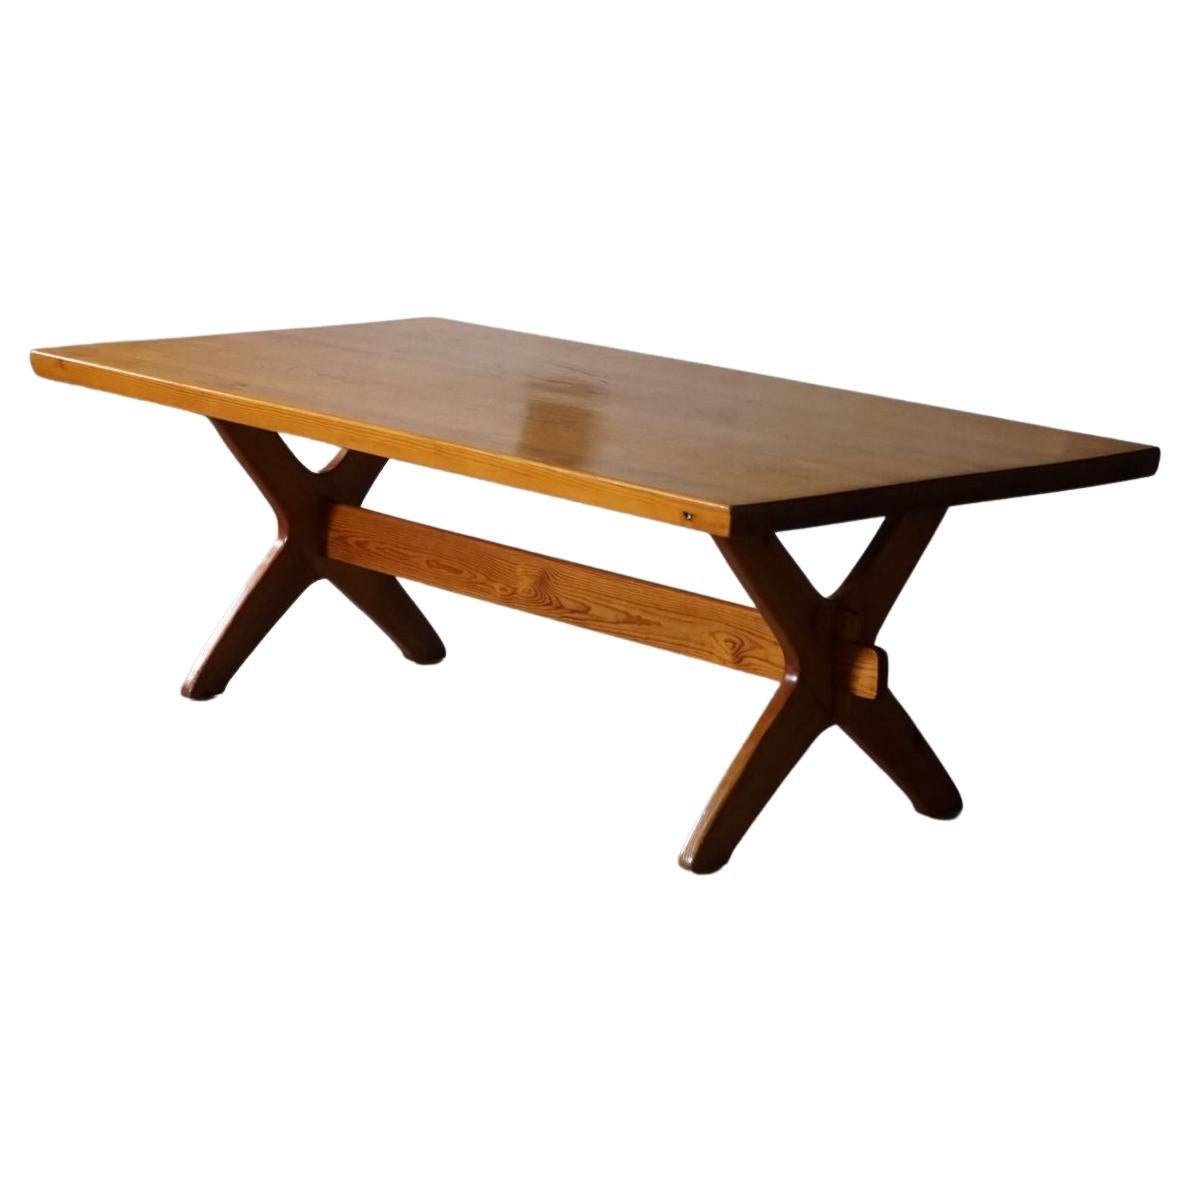 Danish Modern Large Rectangular Coffee Table in Solid Pine, Late 20th Century For Sale